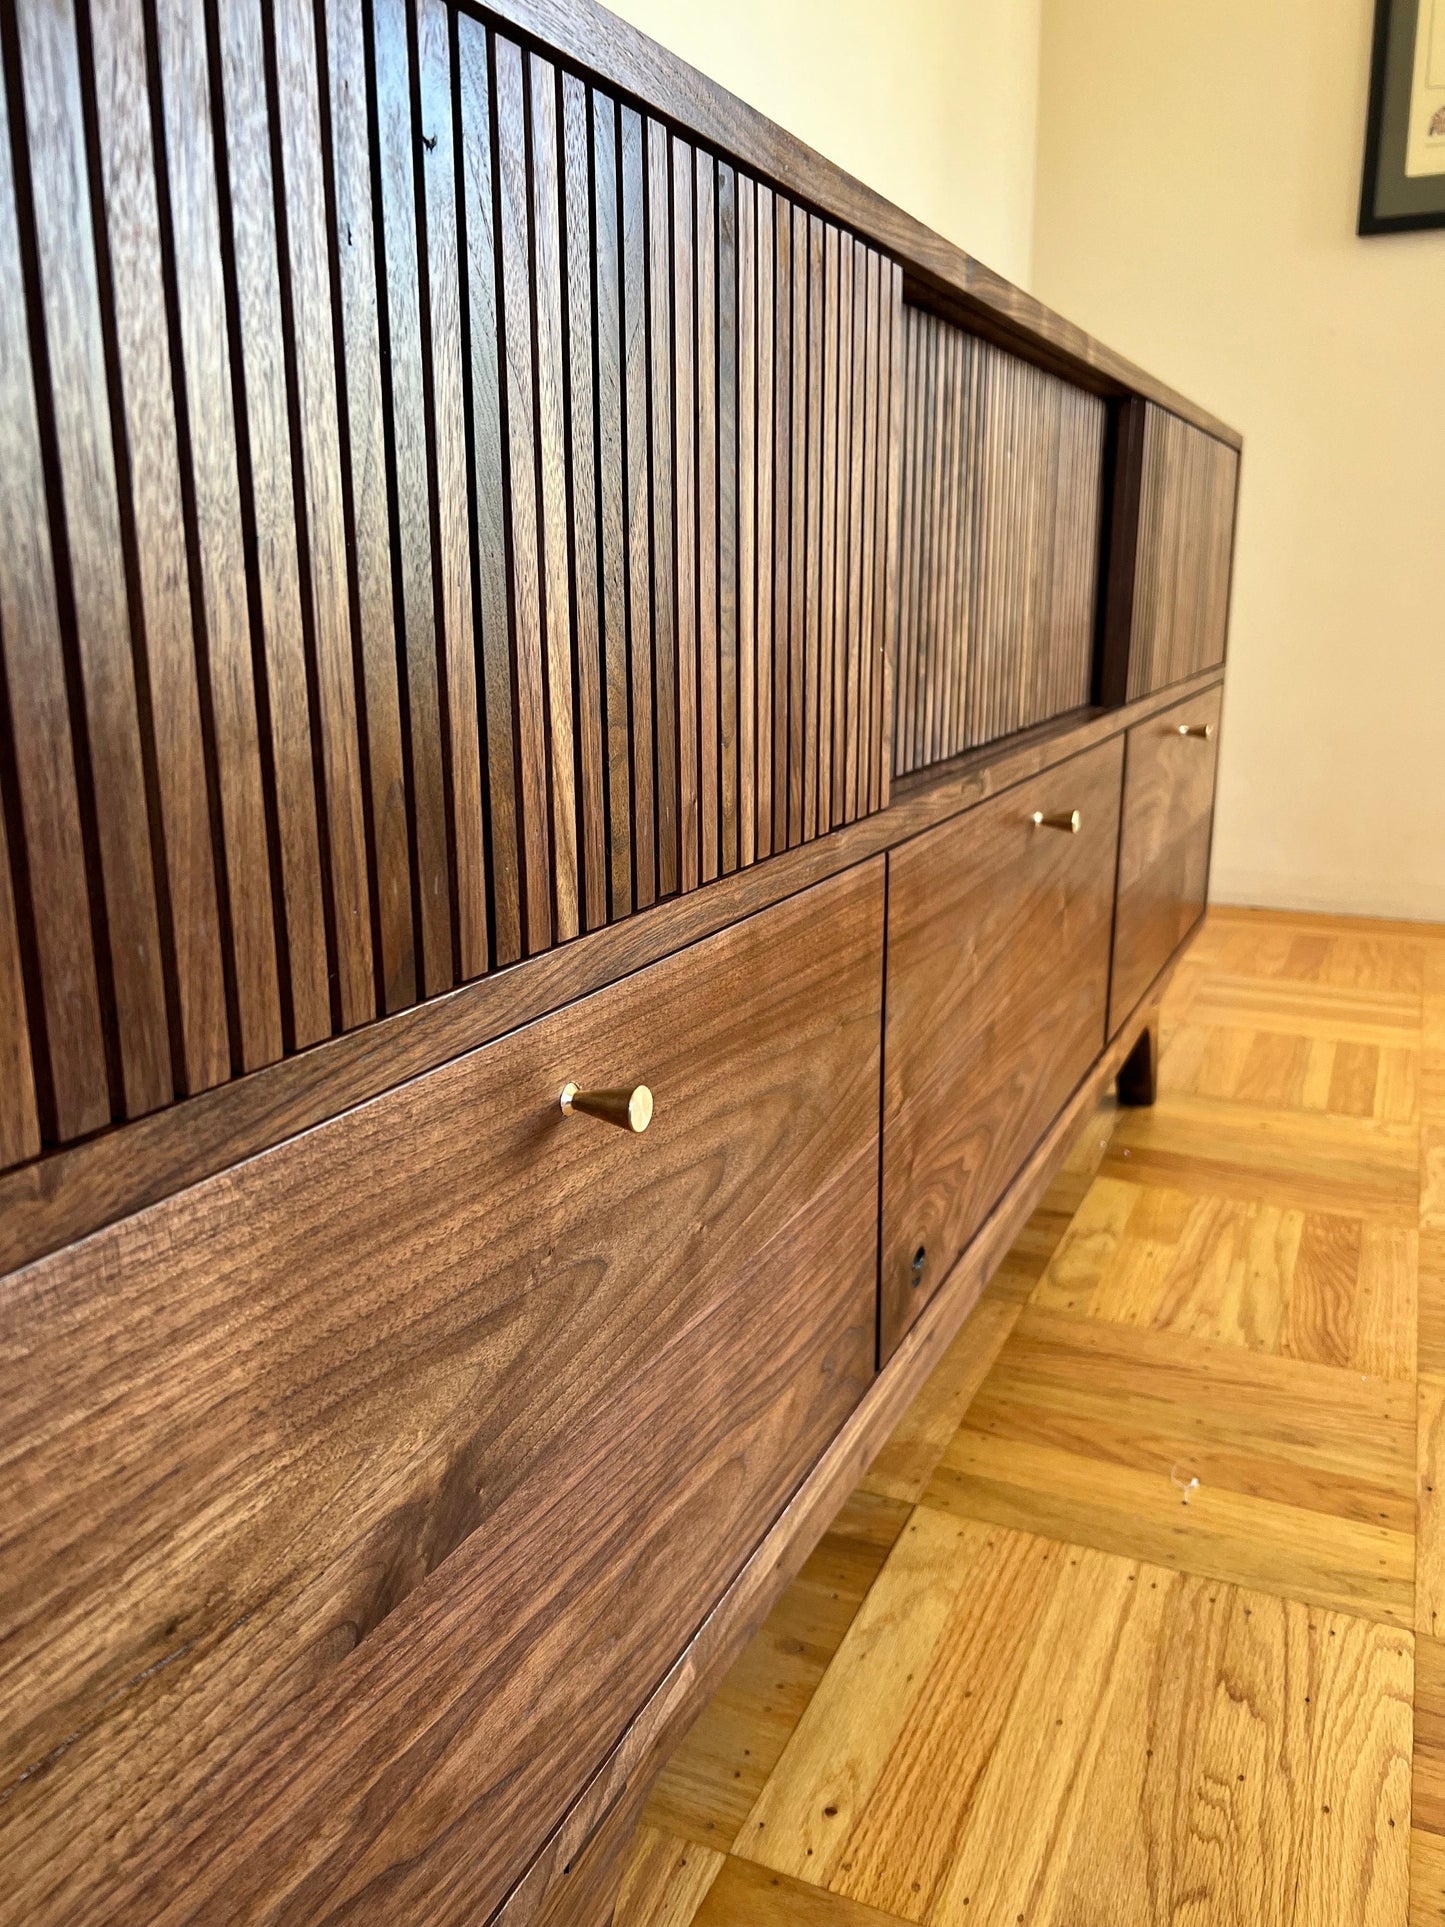 A close up photo of rectangular slat texture of the cabinets sliding doors. 3 drawers line the bottom, with even reveals around the drawers perimeter. About 2 inches from the top and centered in each drawer is a tapering, brass finger pull.